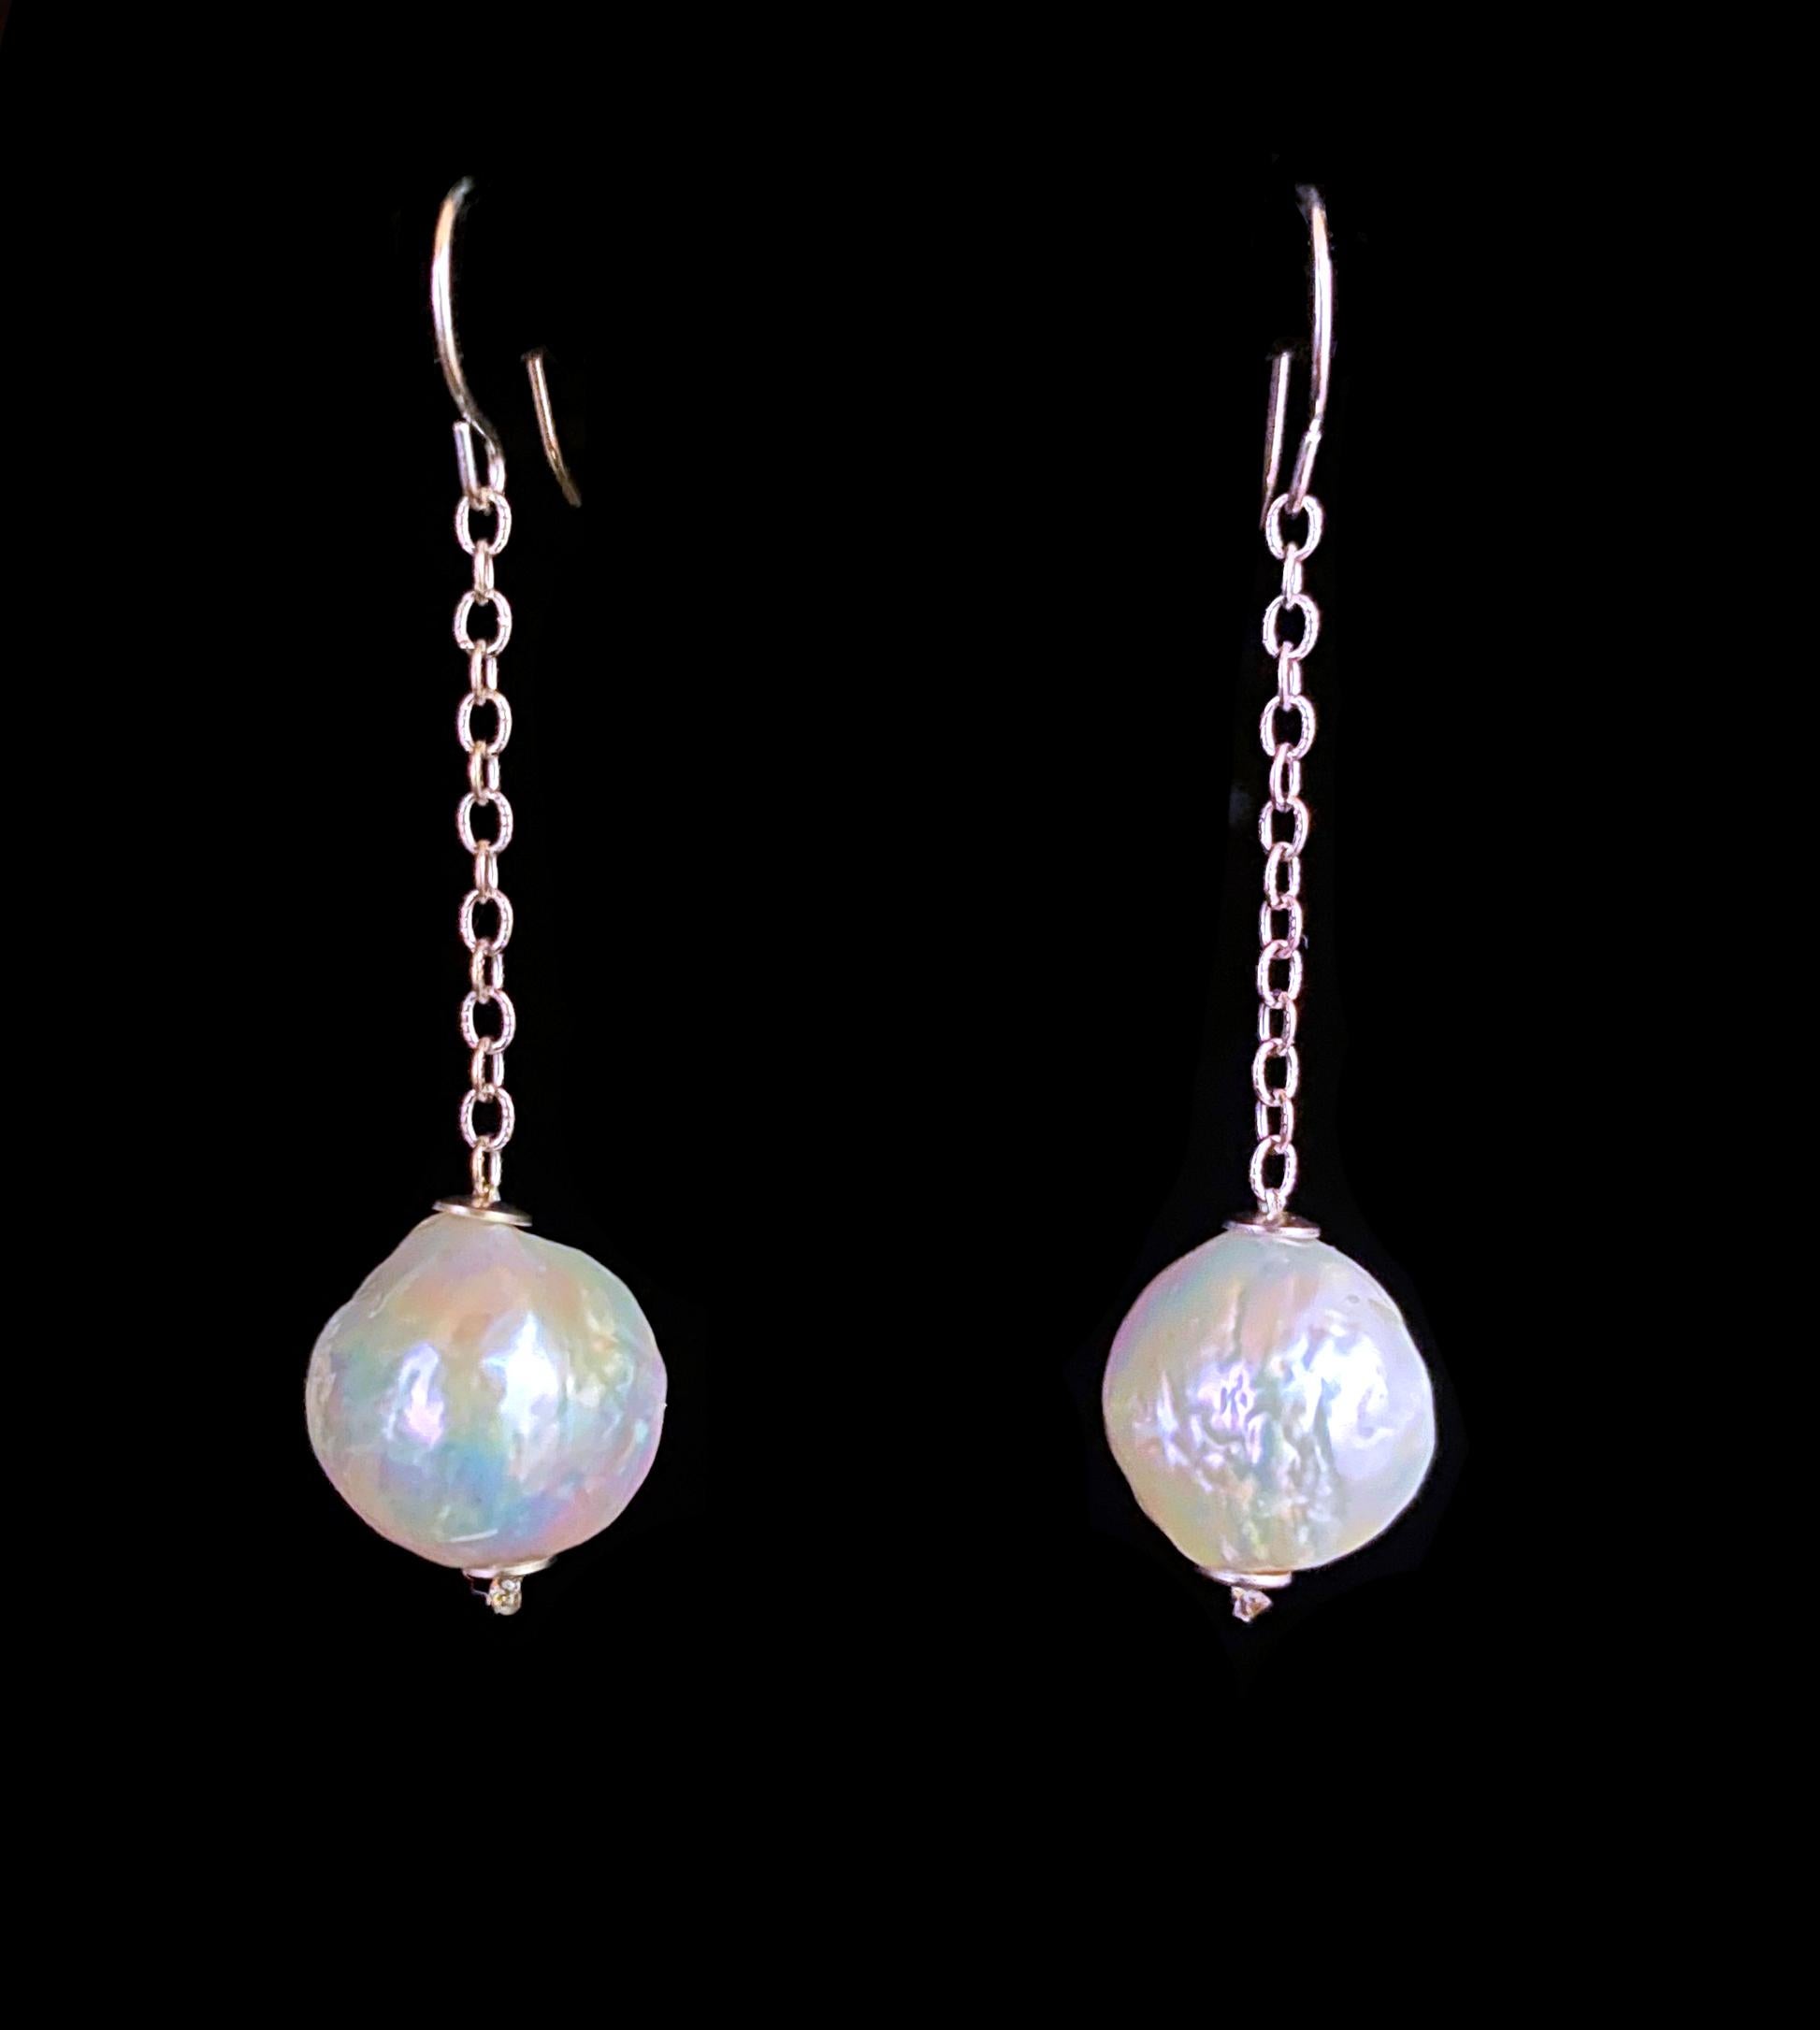 Simple and elegant pair of Earrings by Marina J. This pair of made of two cultured Baroque Pearls displaying a textured body and beautiful iridescent luster that flashes multiple colors. The Pearls are suspended between two solid 14k White Gold cups